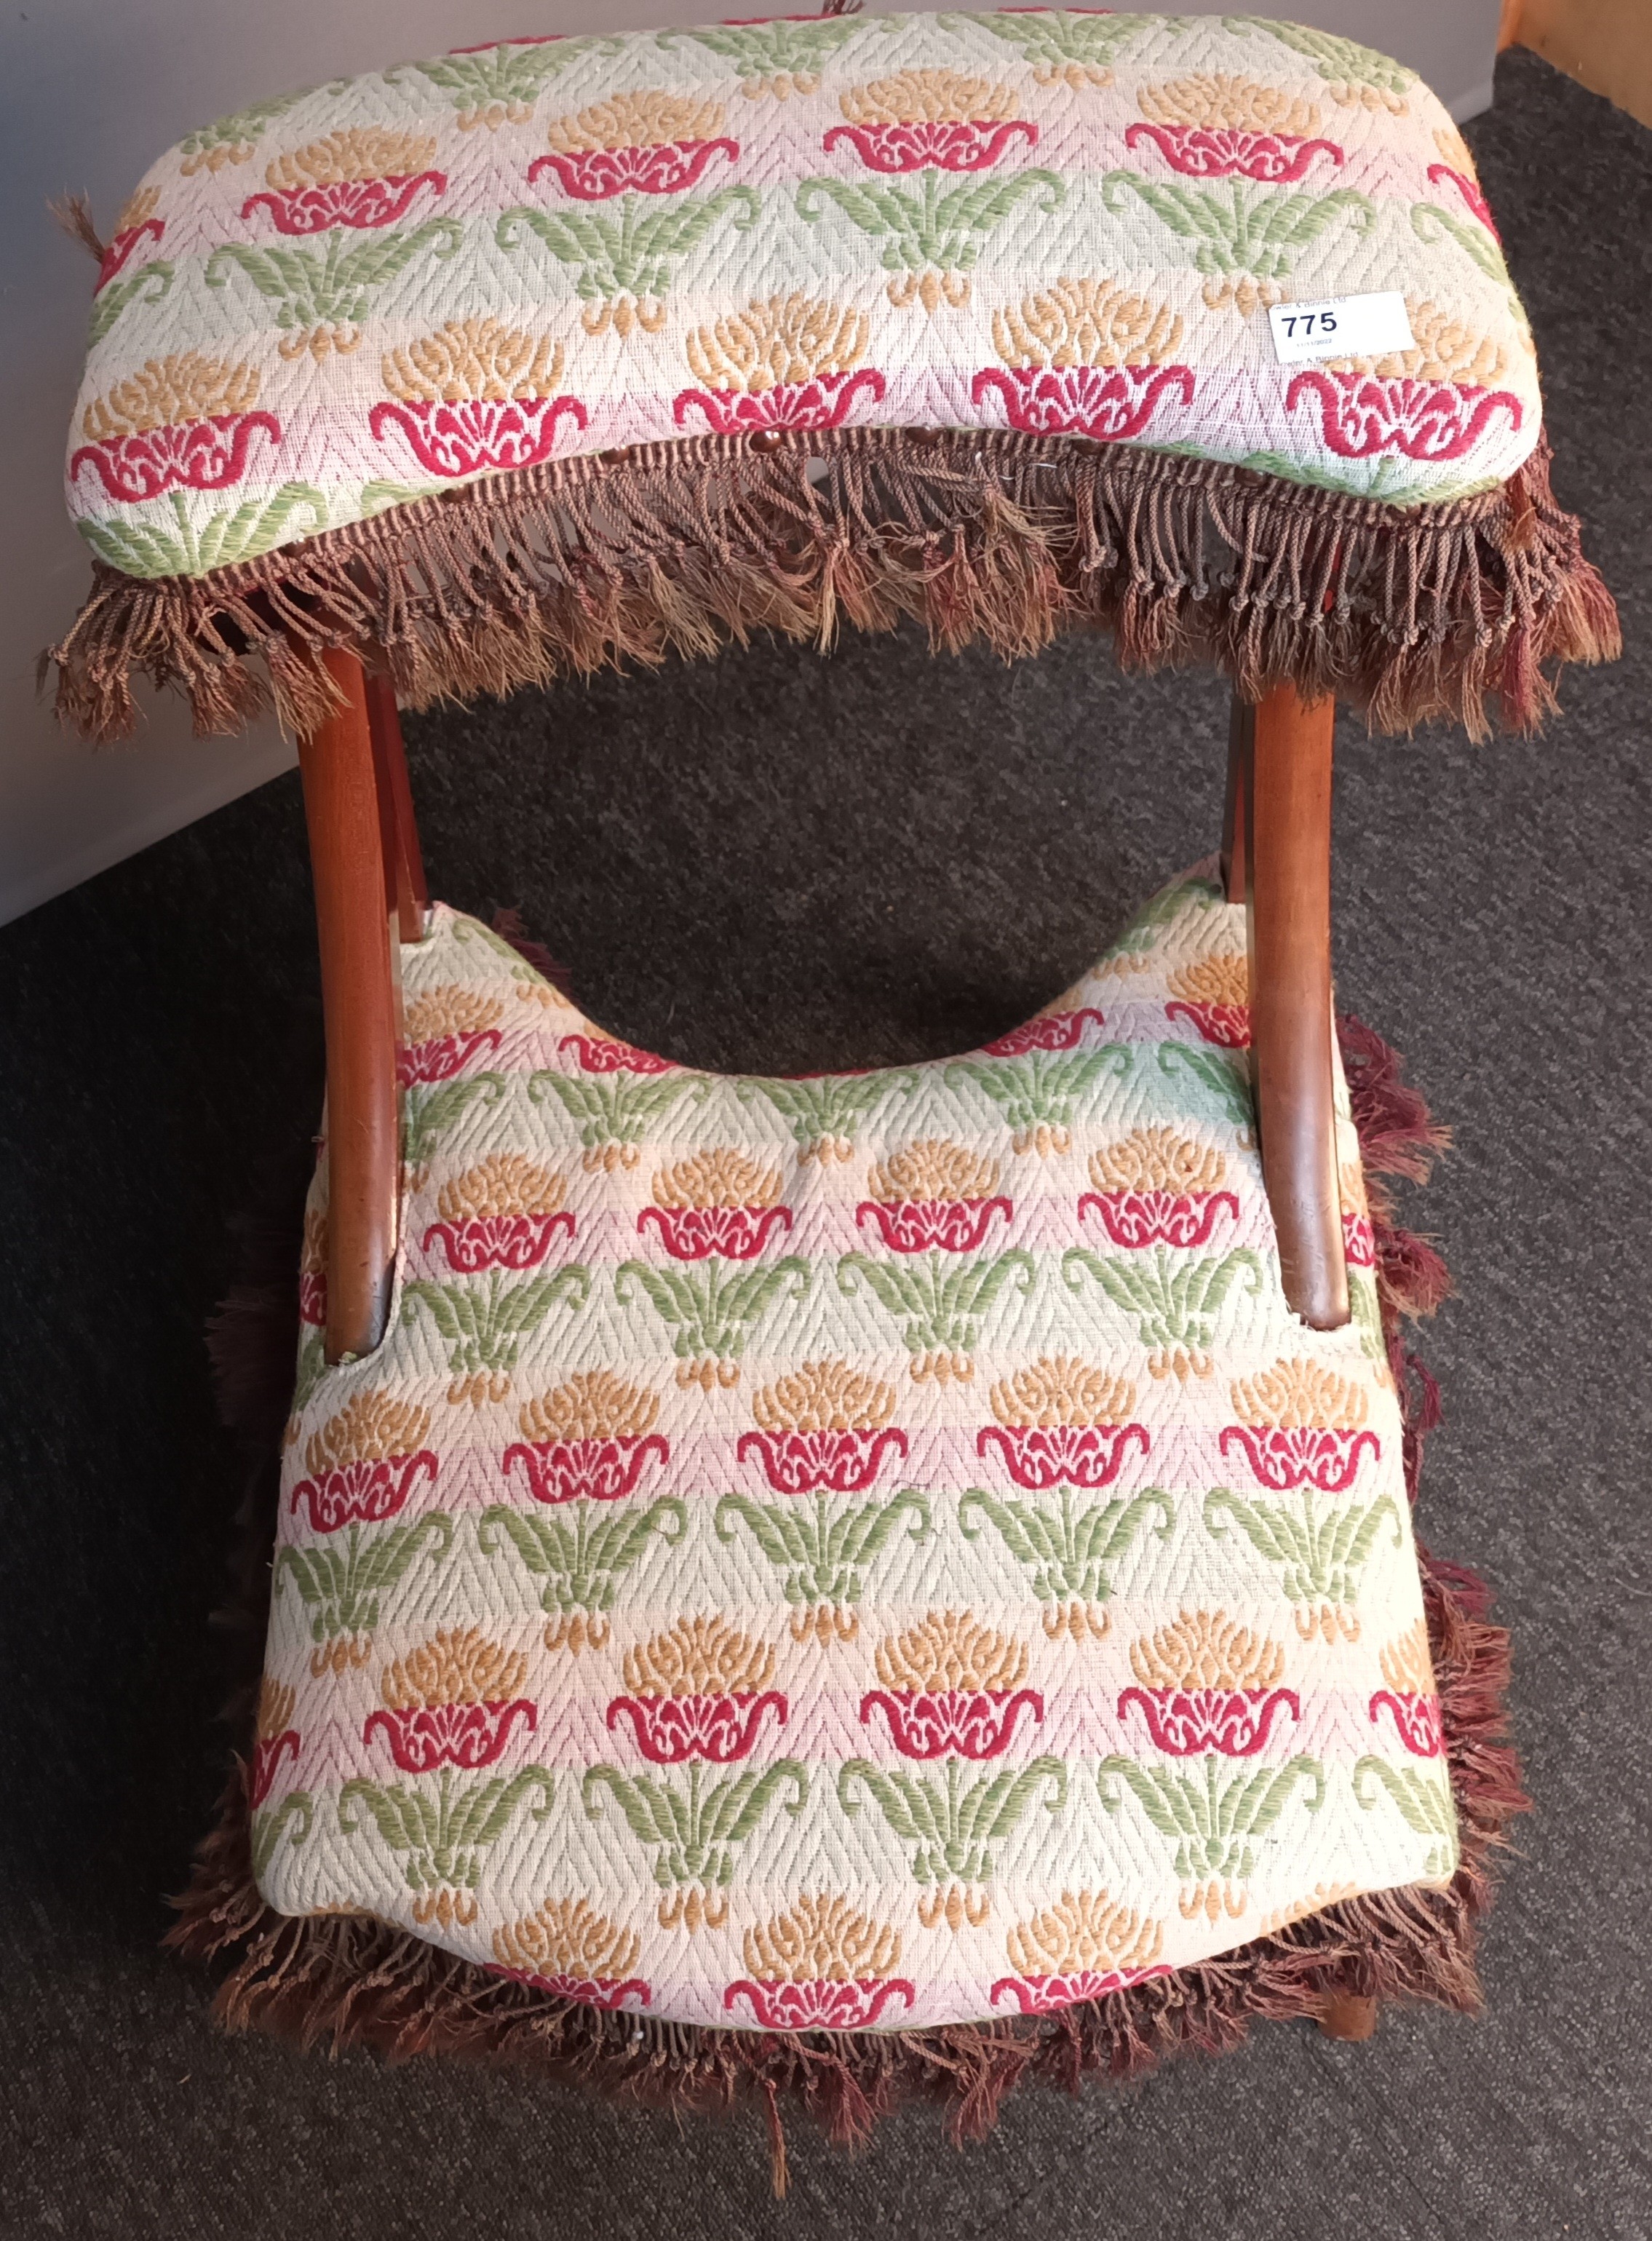 19th century prayer stool/ chair, upholstered in a floral material with brown fringe, raised on - Image 3 of 4